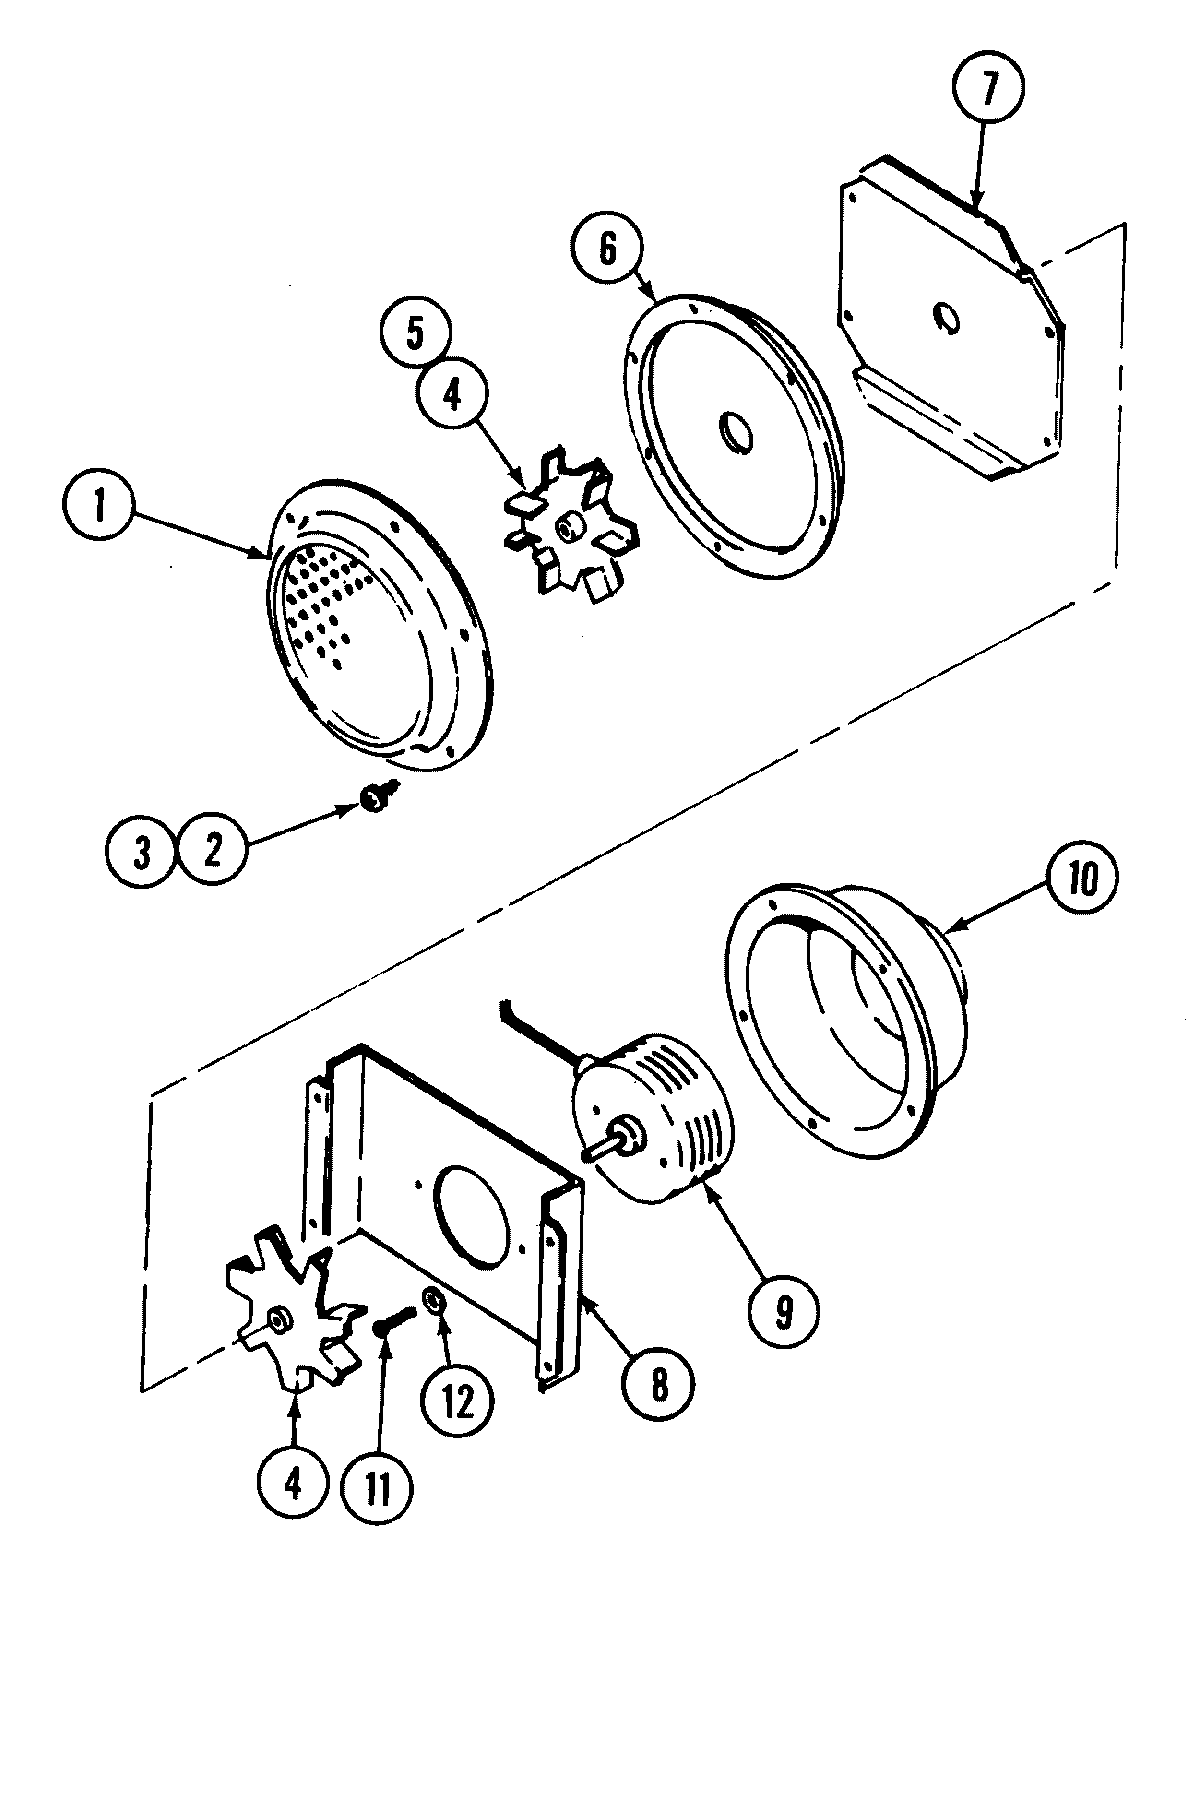 01 - BLOWER MOTOR (CONVECTION)